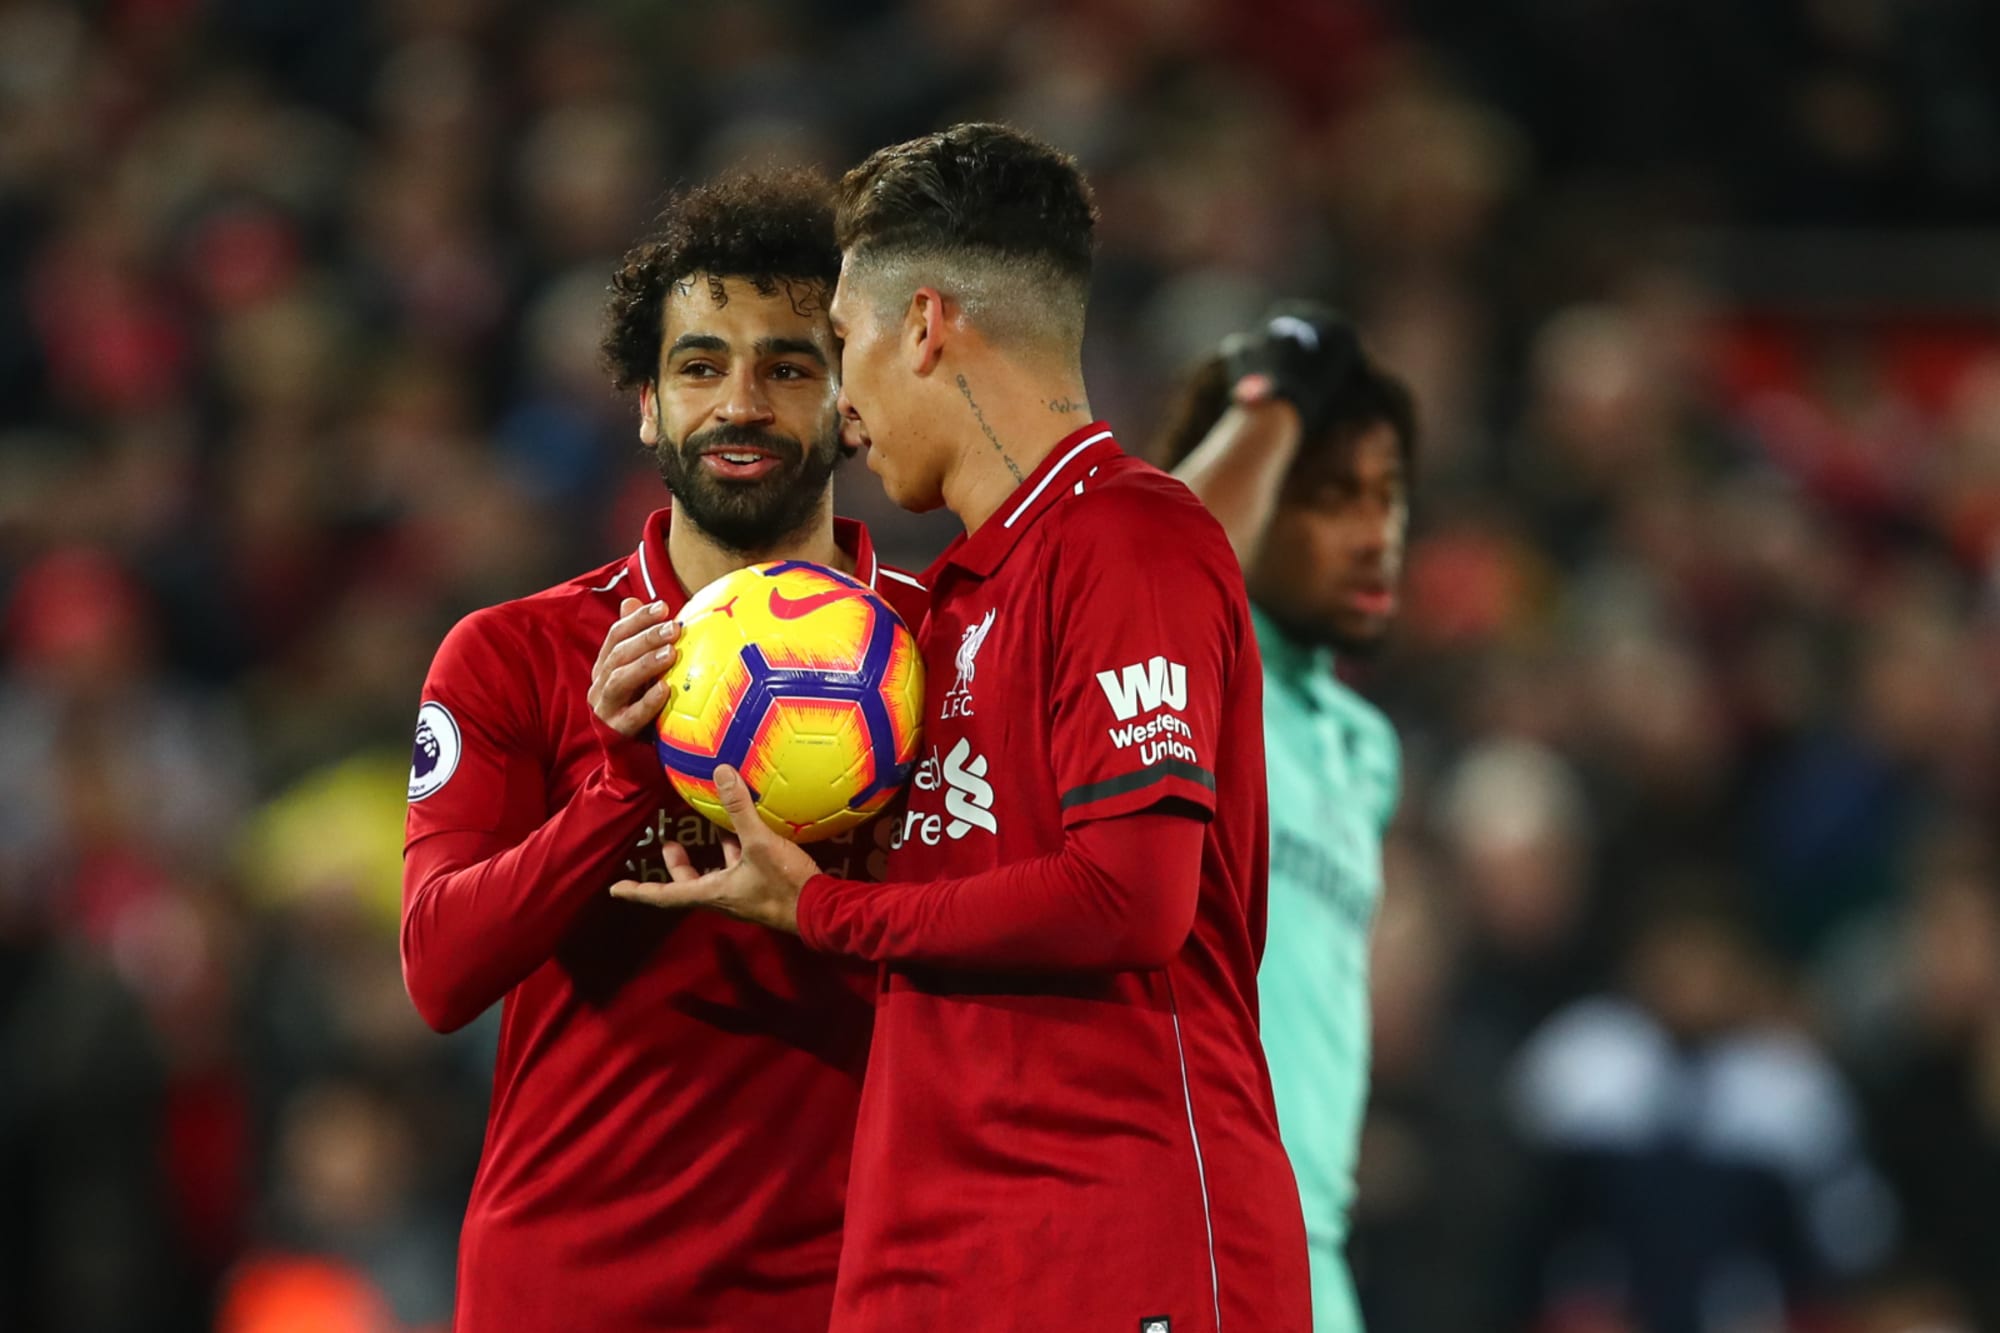 Liverpool to face Barcelona without Salah and Firmino